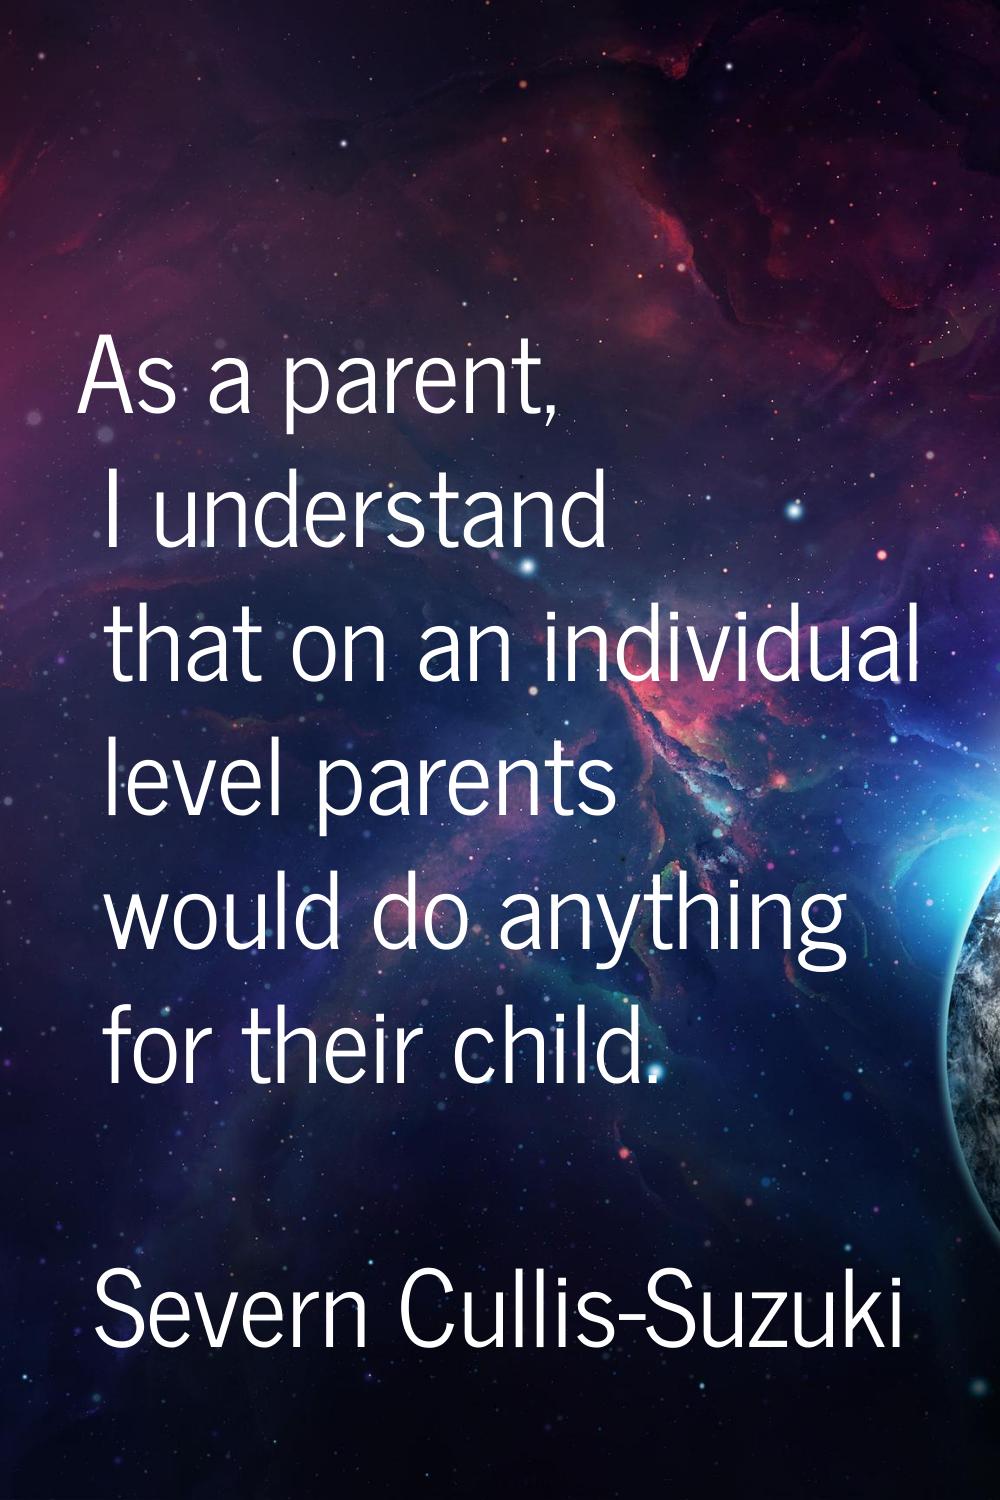 As a parent, I understand that on an individual level parents would do anything for their child.